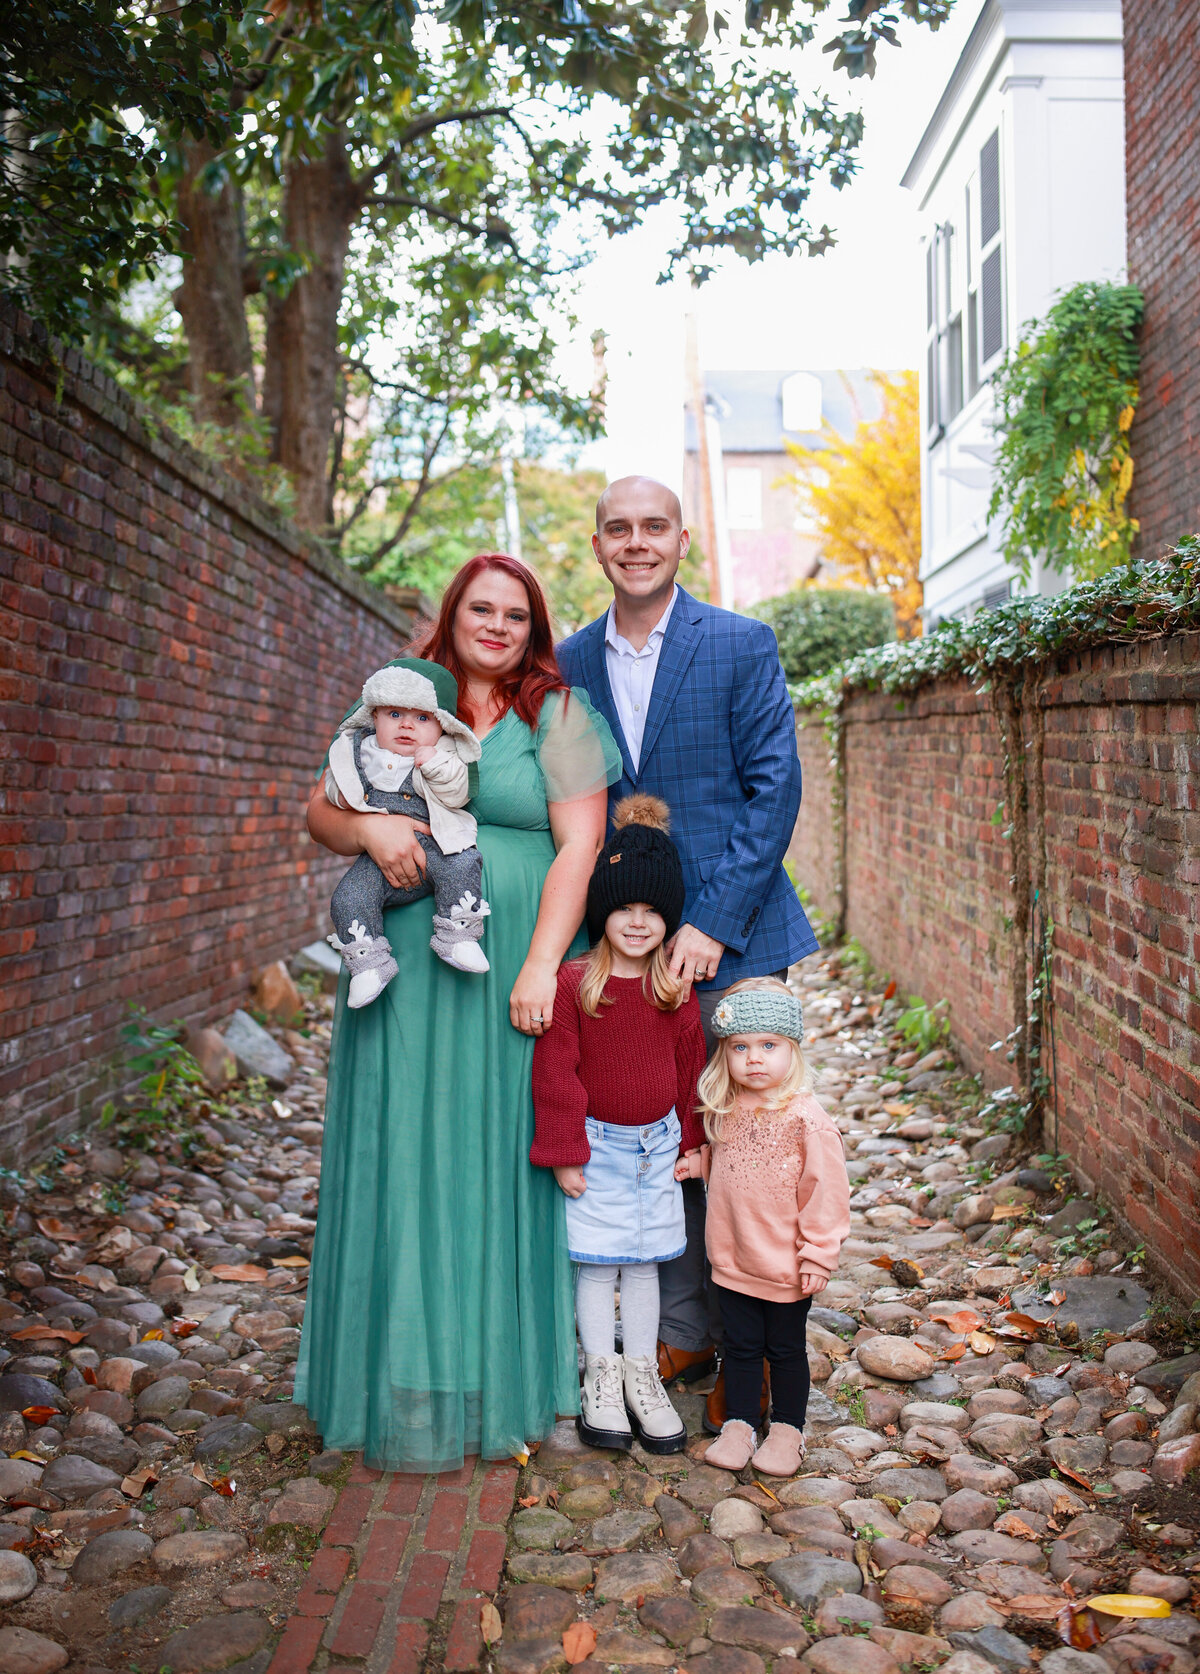 man, woman, and three children  standing on pebble and next to brick wall